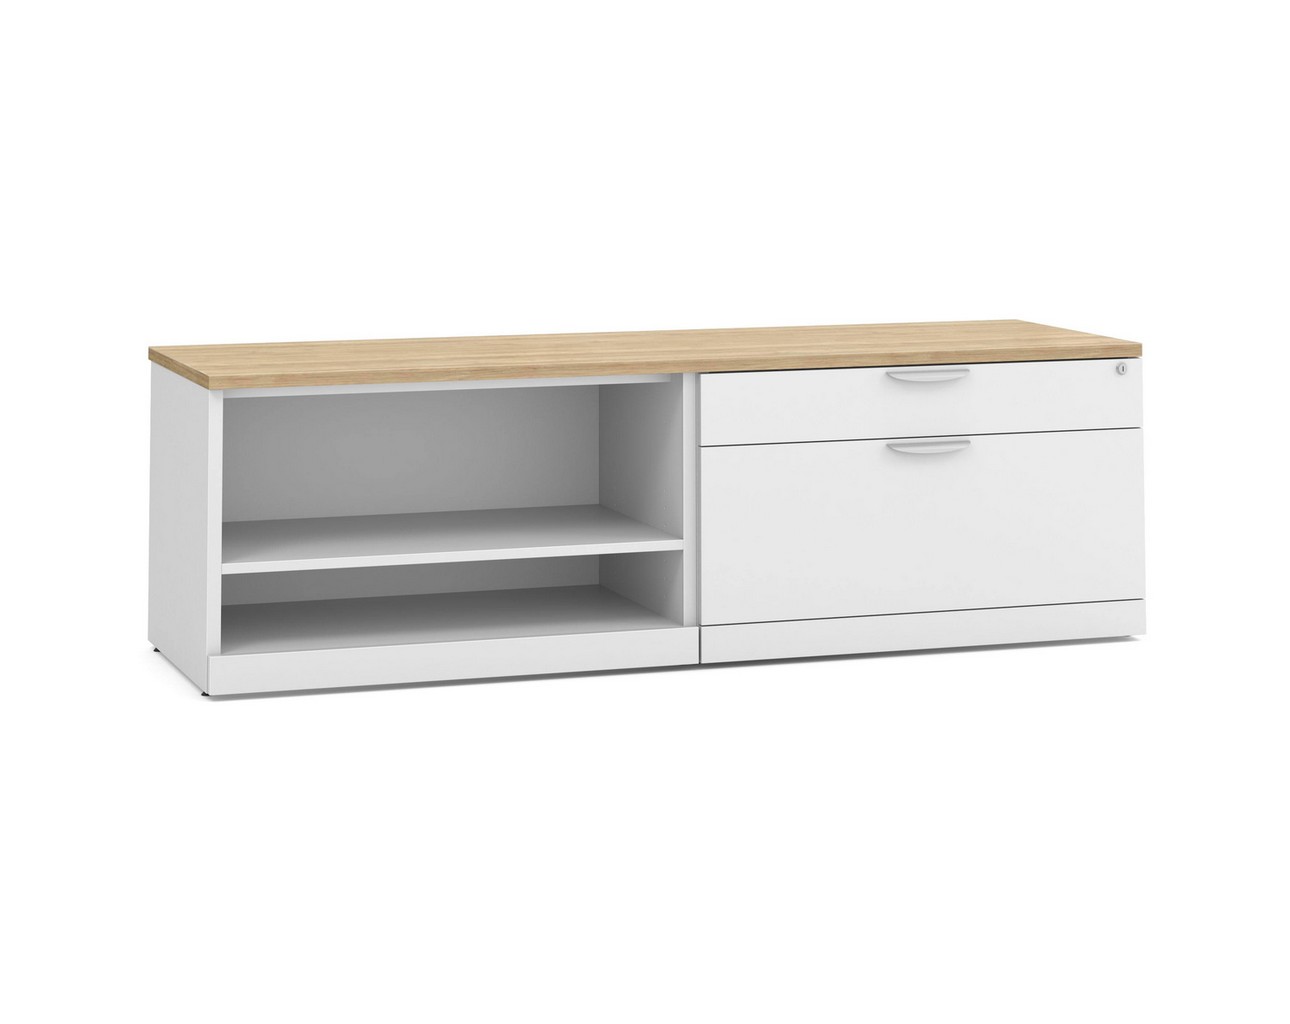 Elements Storage Cabinet and Bookshelf Credenza – WHT Base and APN Top